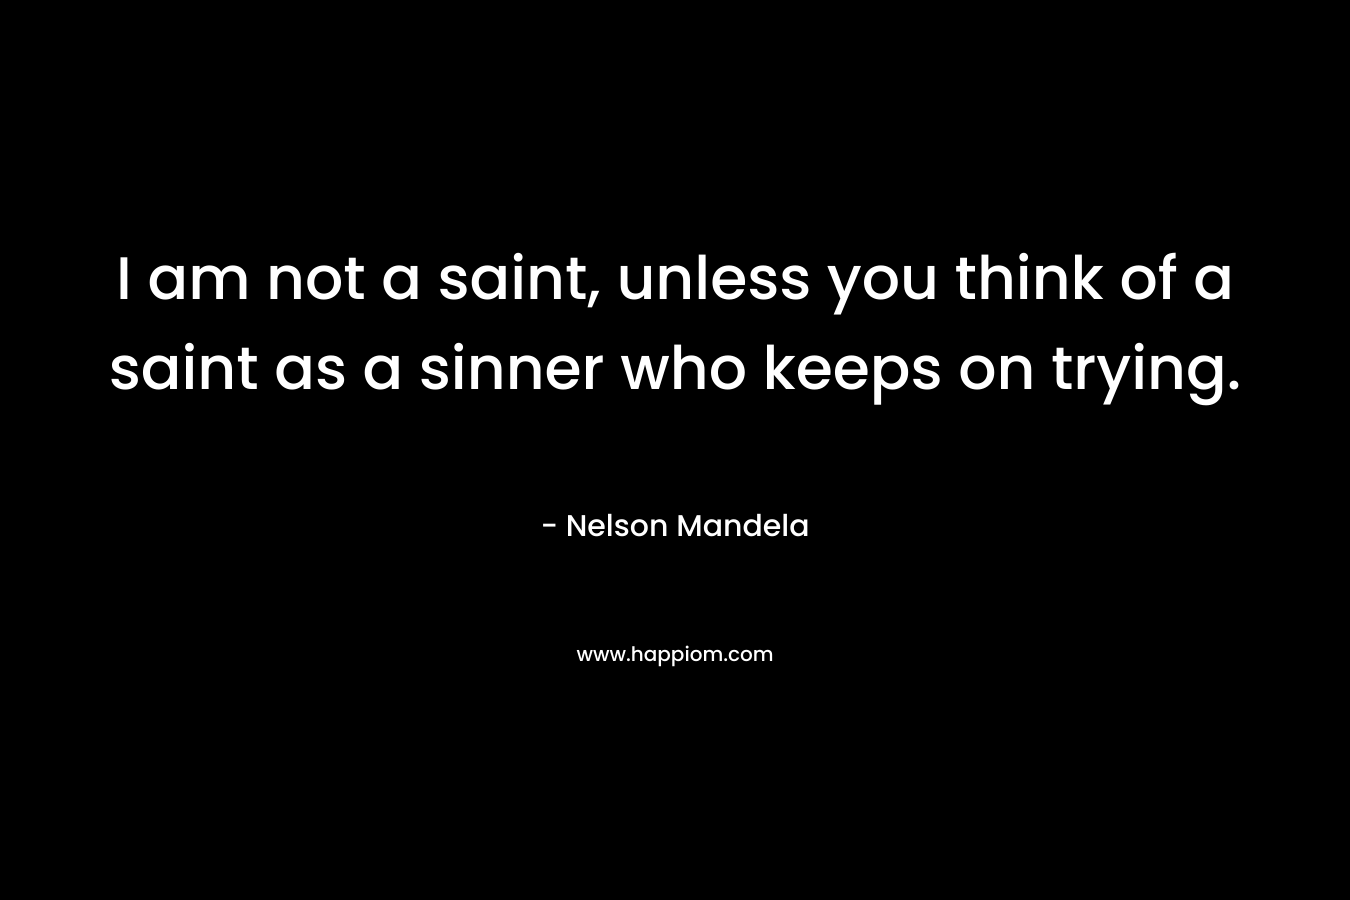 I am not a saint, unless you think of a saint as a sinner who keeps on trying. – Nelson Mandela